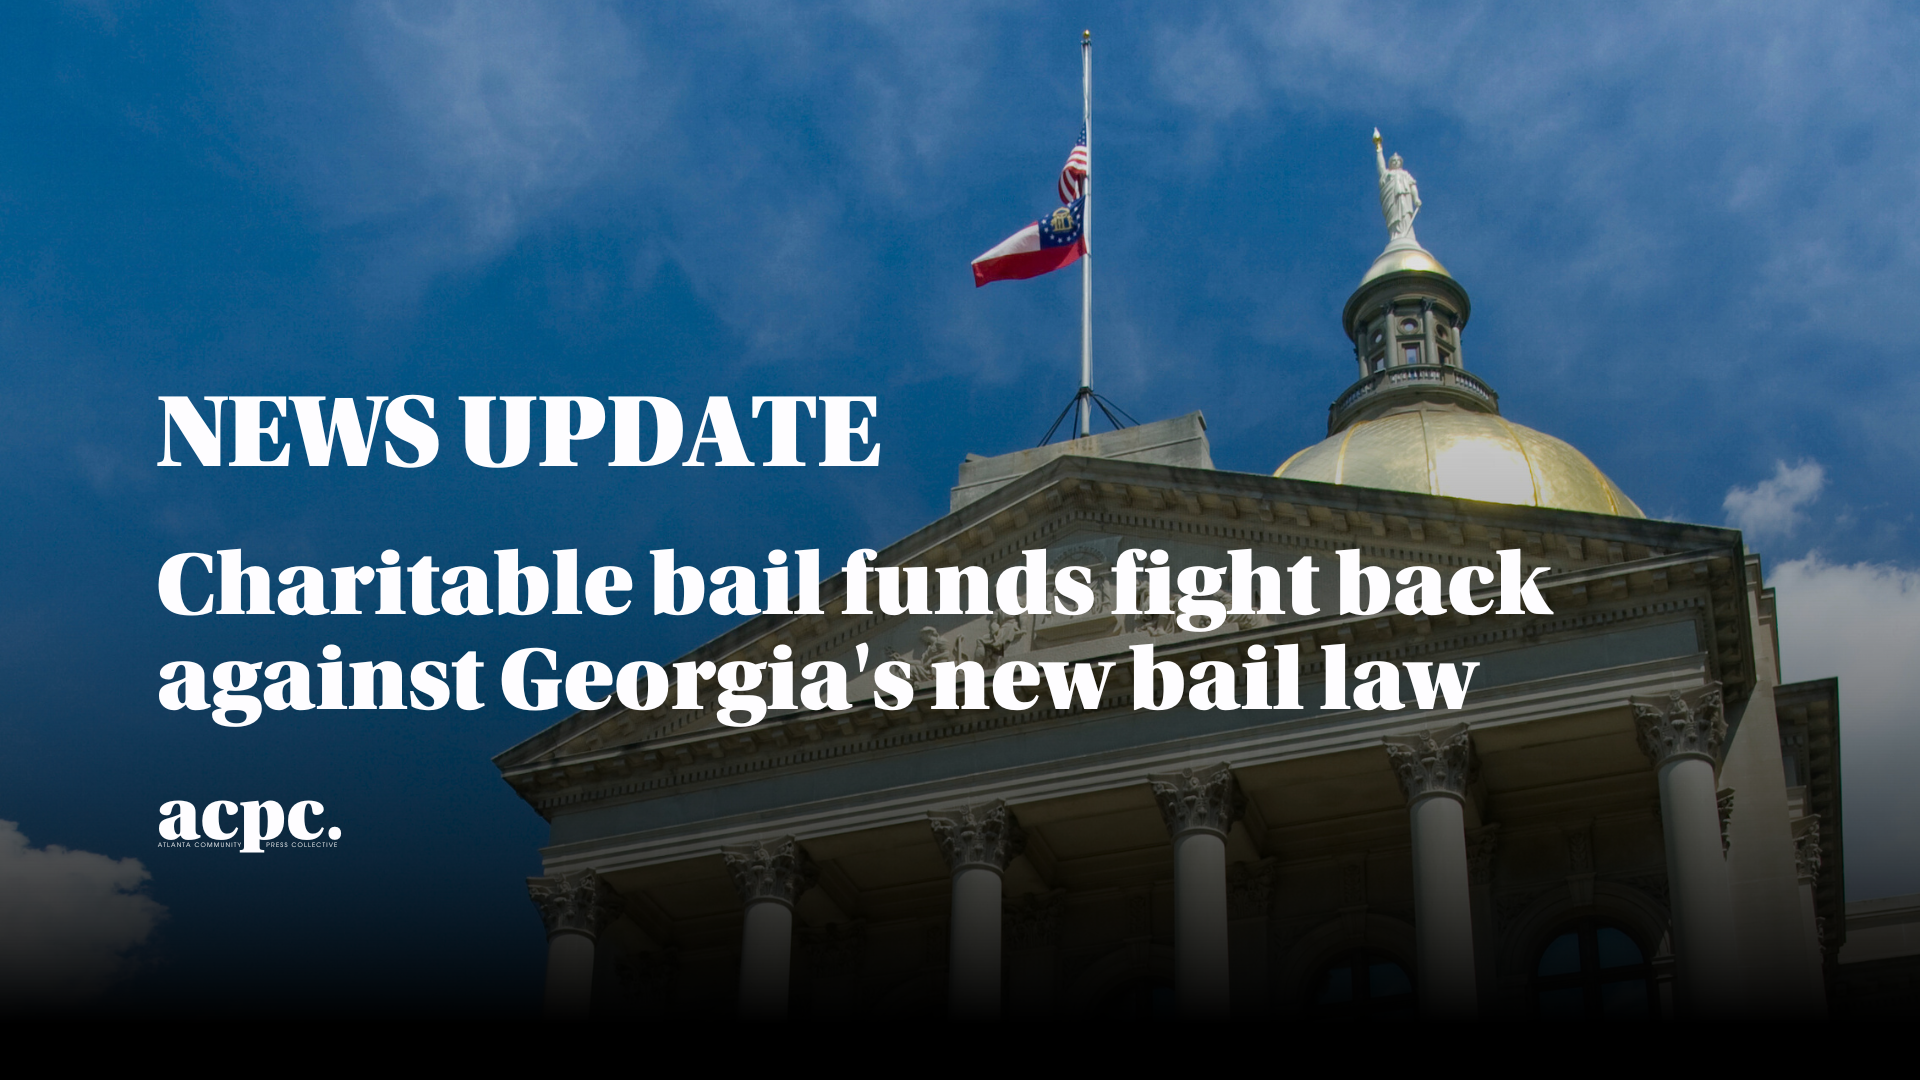 Charitable bail funds fight back against Georgia’s new bail law